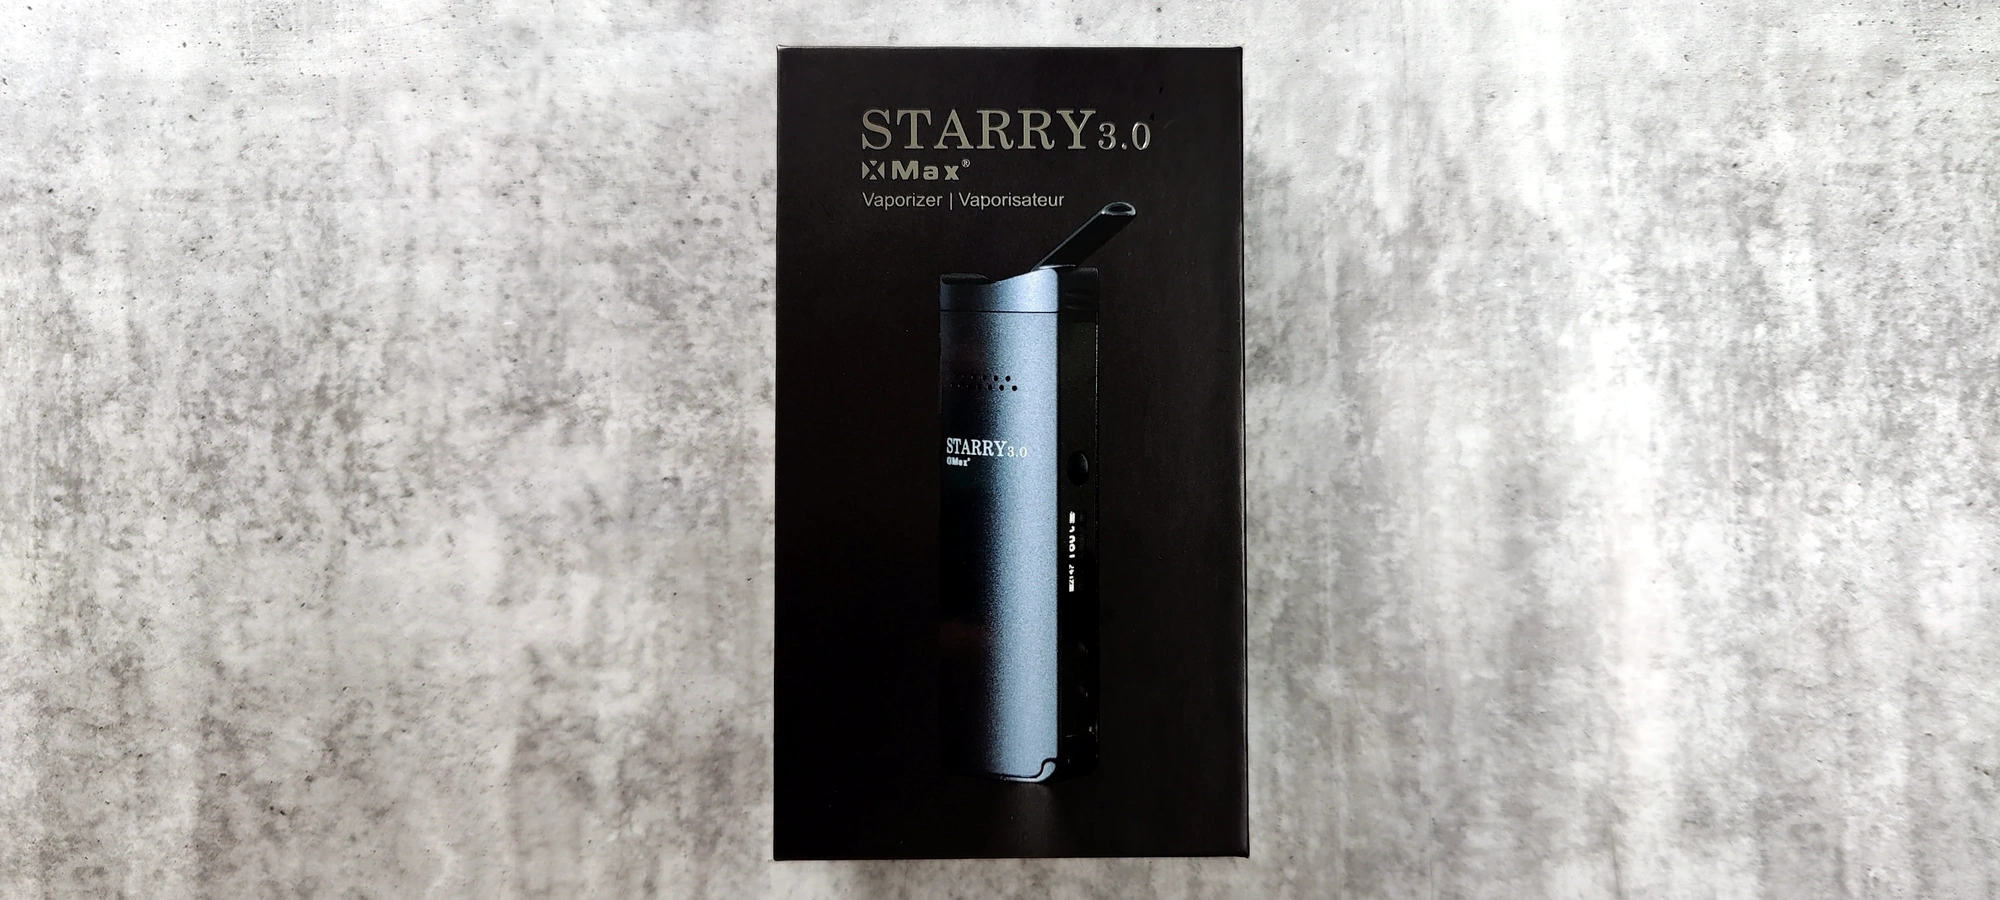 XMAX Starry 3.0 still in the box